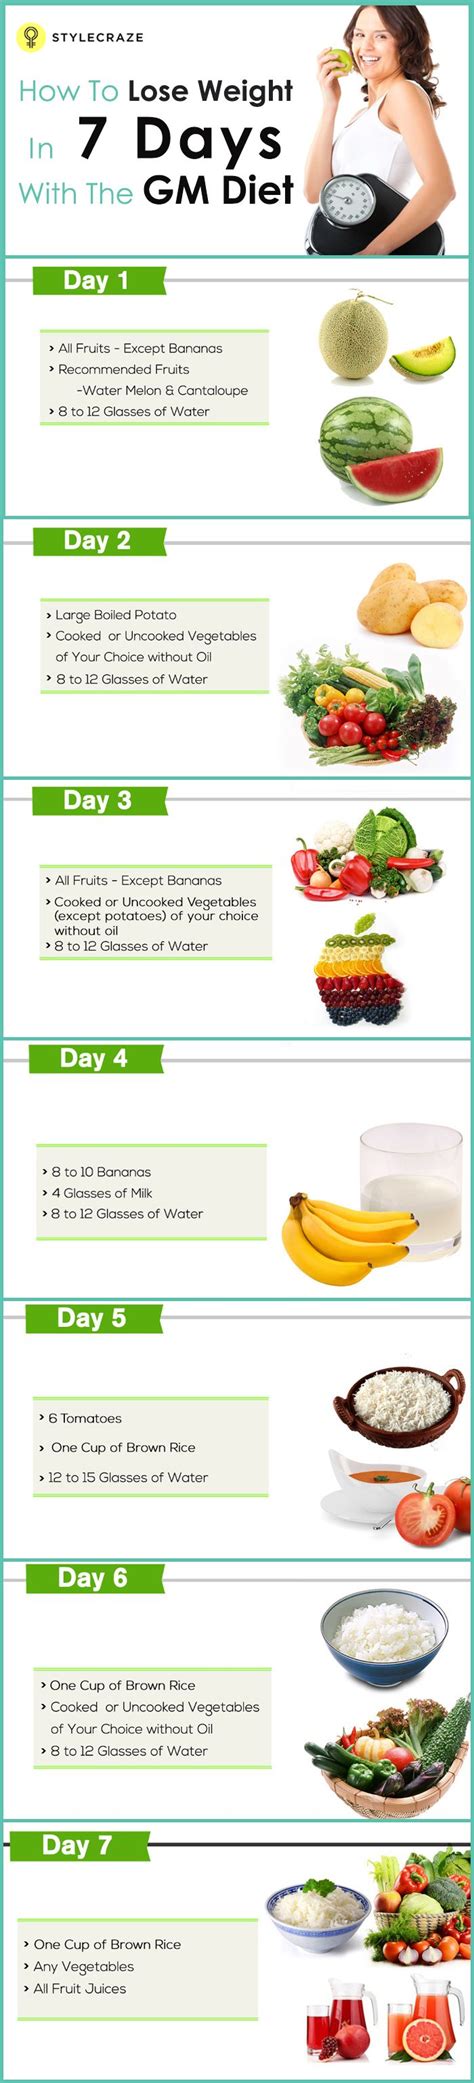 7 Day Diet Meal Plan To Lose Weight 1 Calories Eatingwell Lose